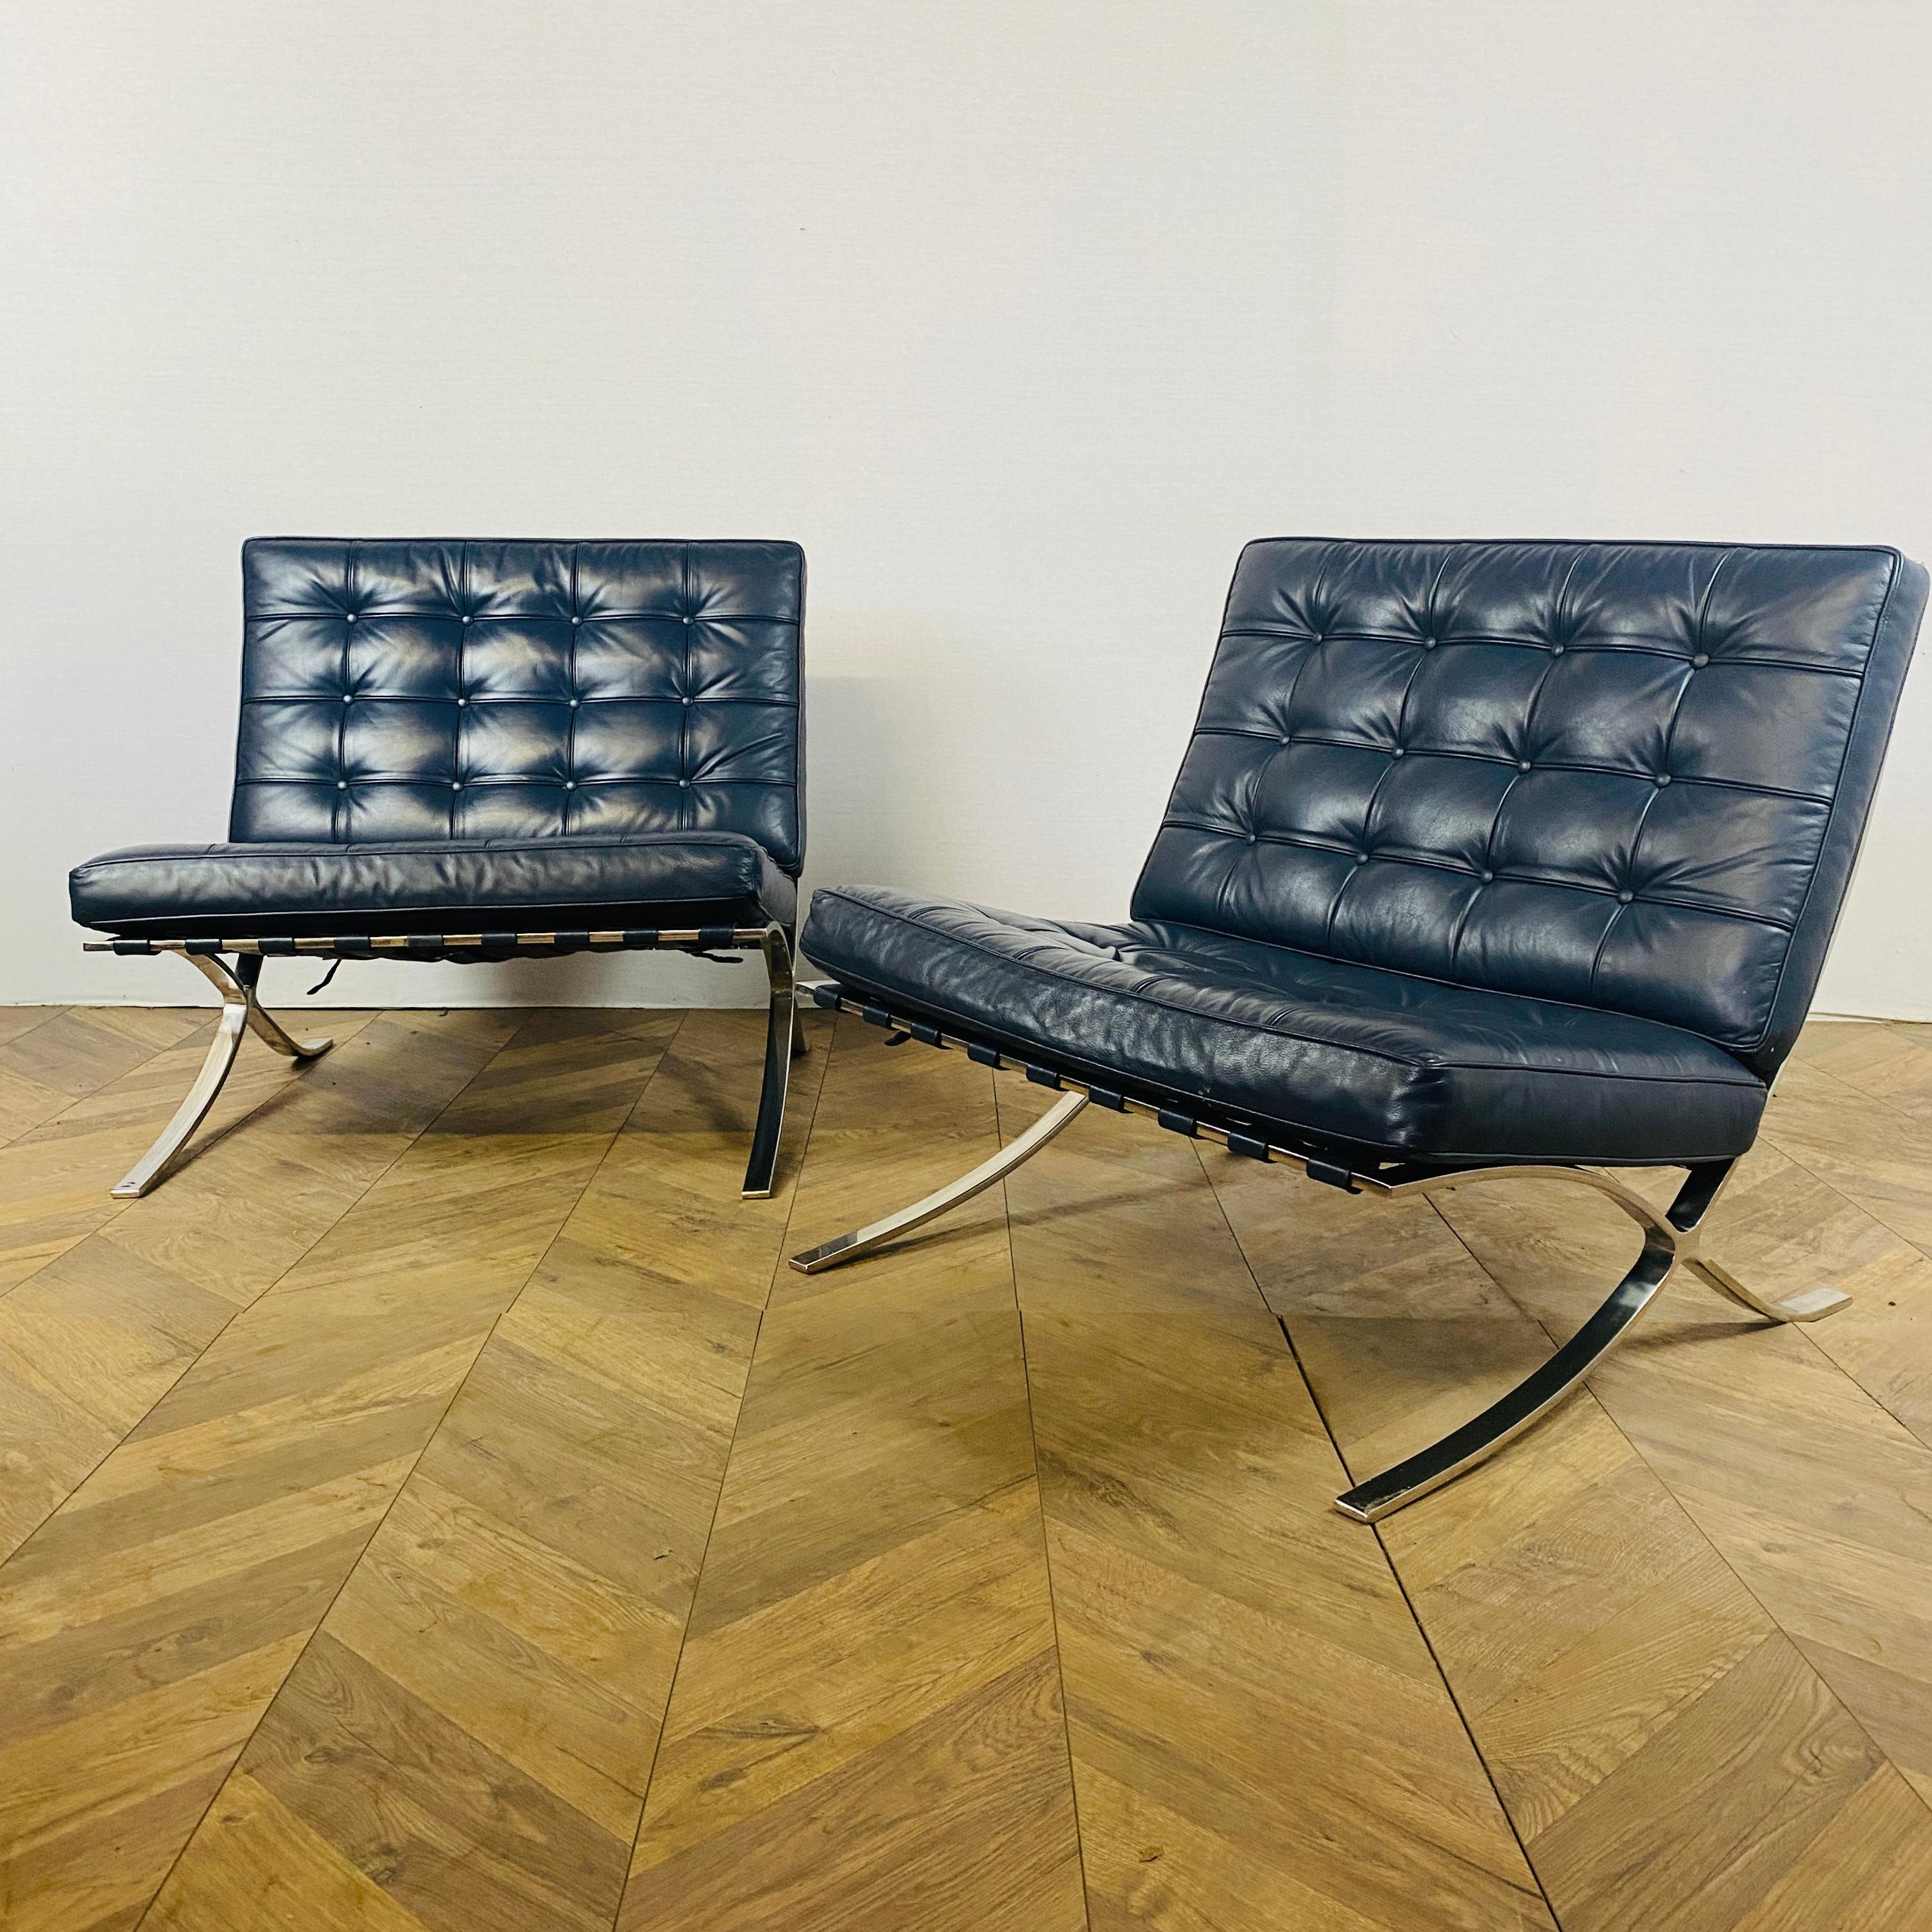 A pair of beautifully Proportioned occasional chairs, Designed by Renowned Designer & Architect Ludwig Mies Van Der Rohe for the German Pavilion at the Barcelona Exhibition of 1929.

These chairs date to the 1980s and finished in rare navy blue